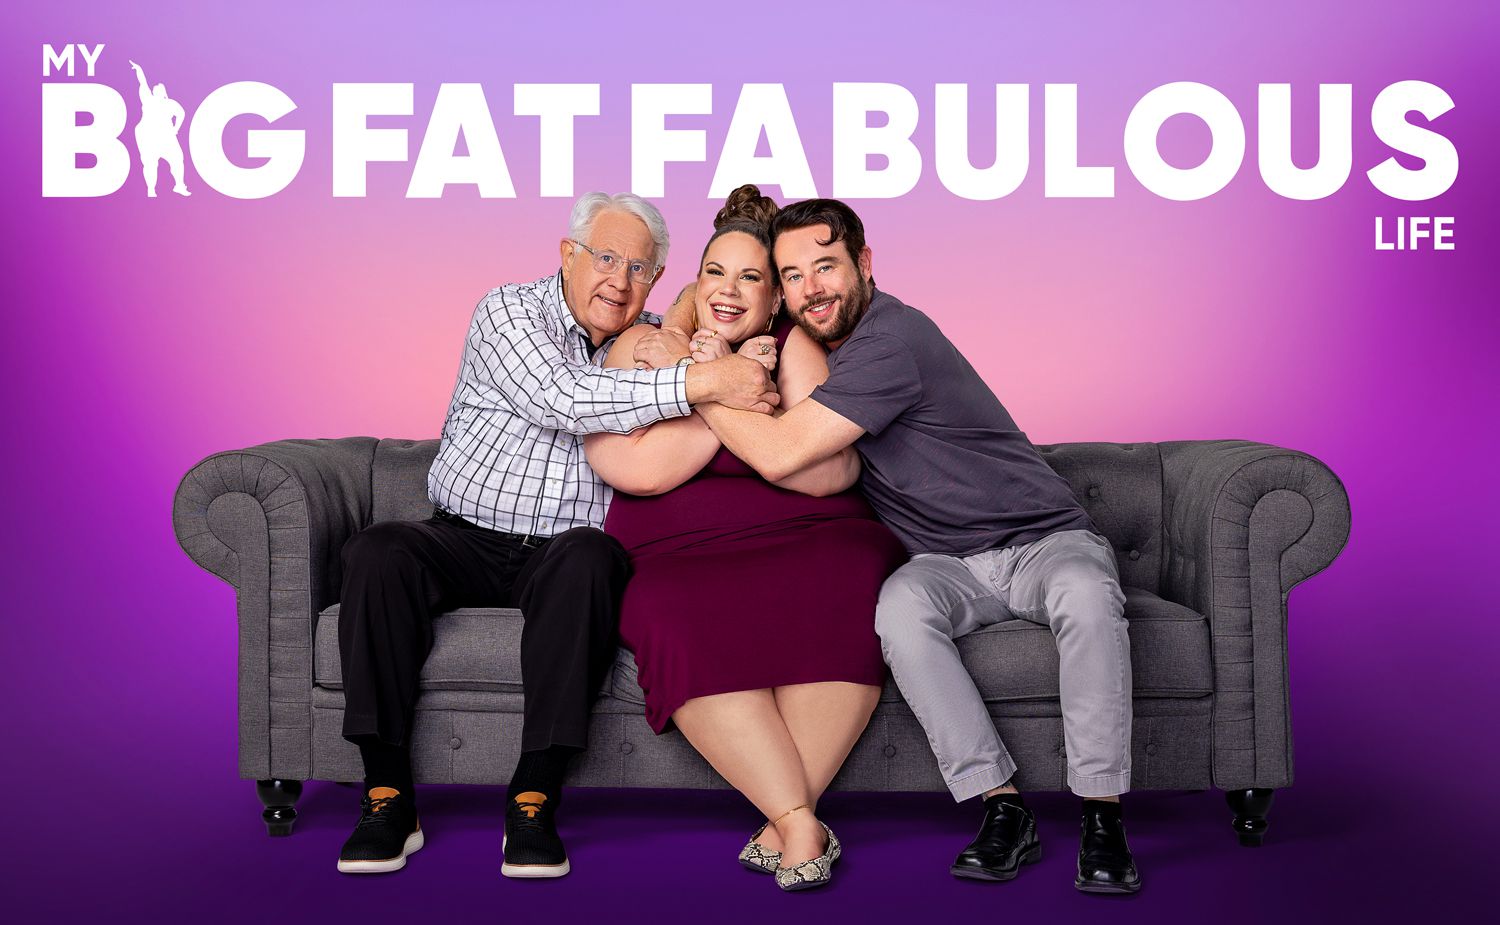 My Big Fat Fabulous Life Returns this Tuesday in TLC